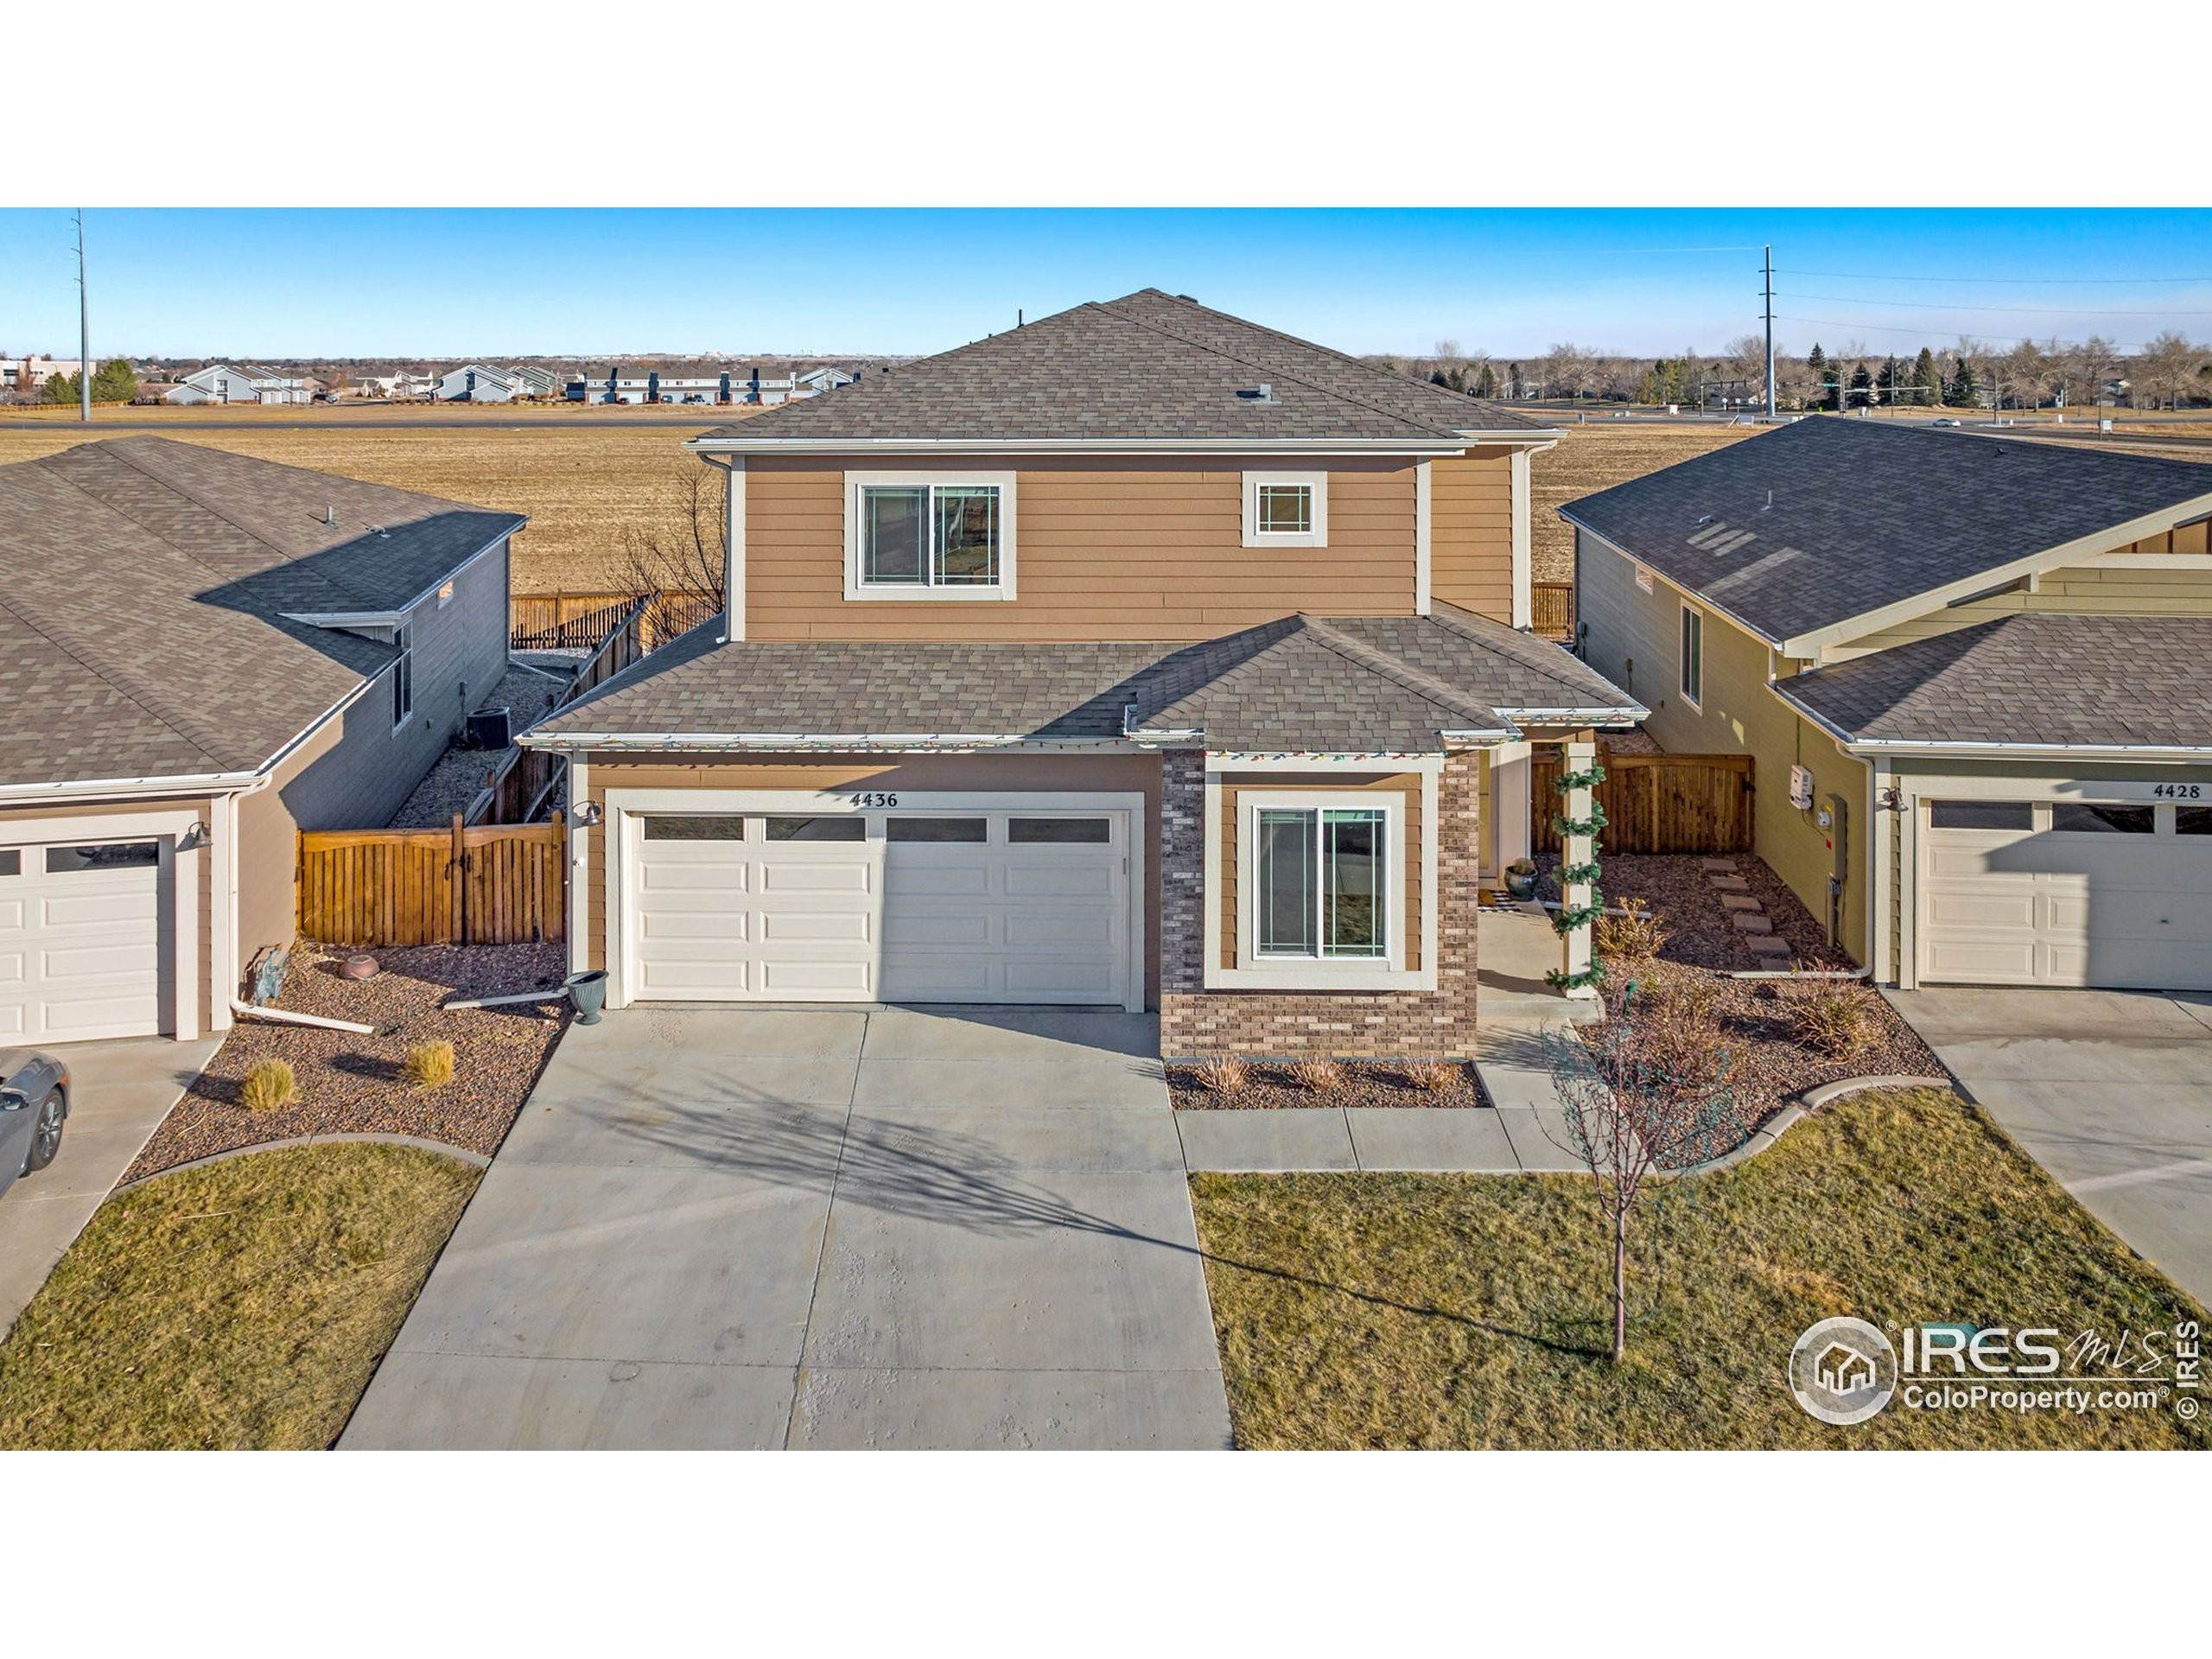 Single Family Homes for Active at 4436 Stethern Drive Loveland, Colorado 80538 United States